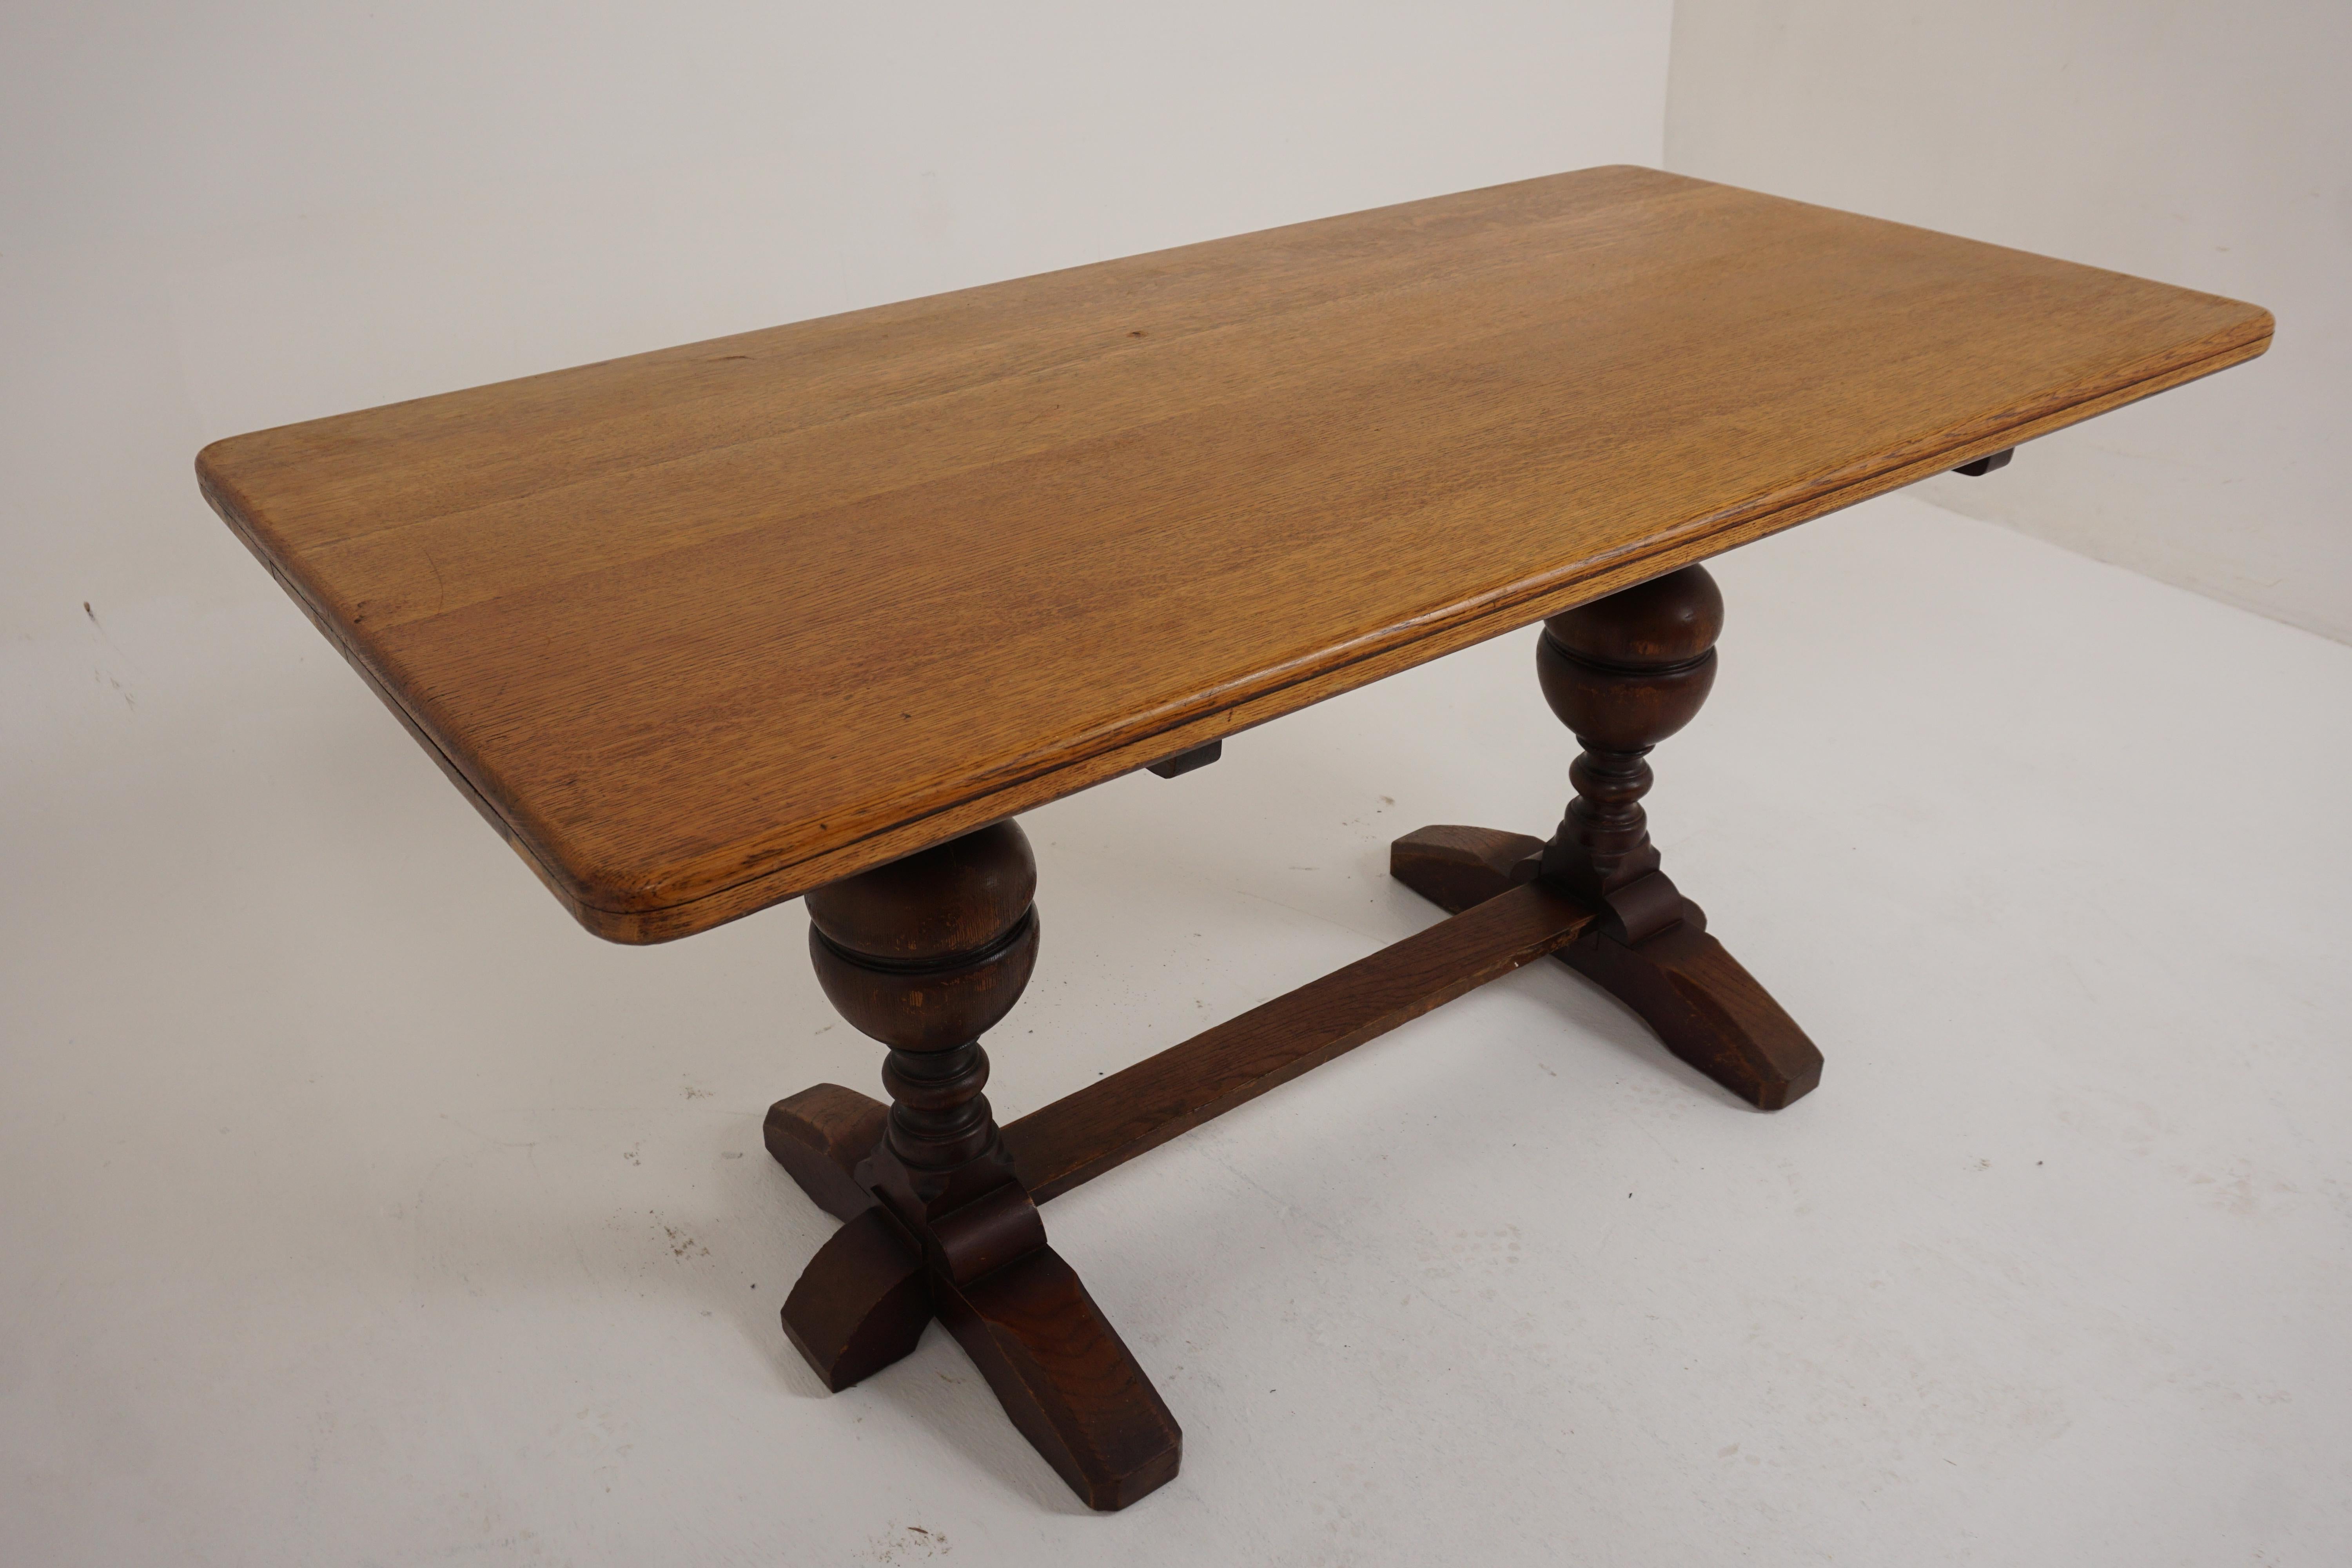 Antique Tiger Oak Refectory table, dining table, writing table, Scotland 1920, B2580

Scotland 1920
Solid oak
Original Finish
Rectangular moulded top with rounded ends
Standing on a pair of bulbous legs
Connected by a thick stretcher
In very